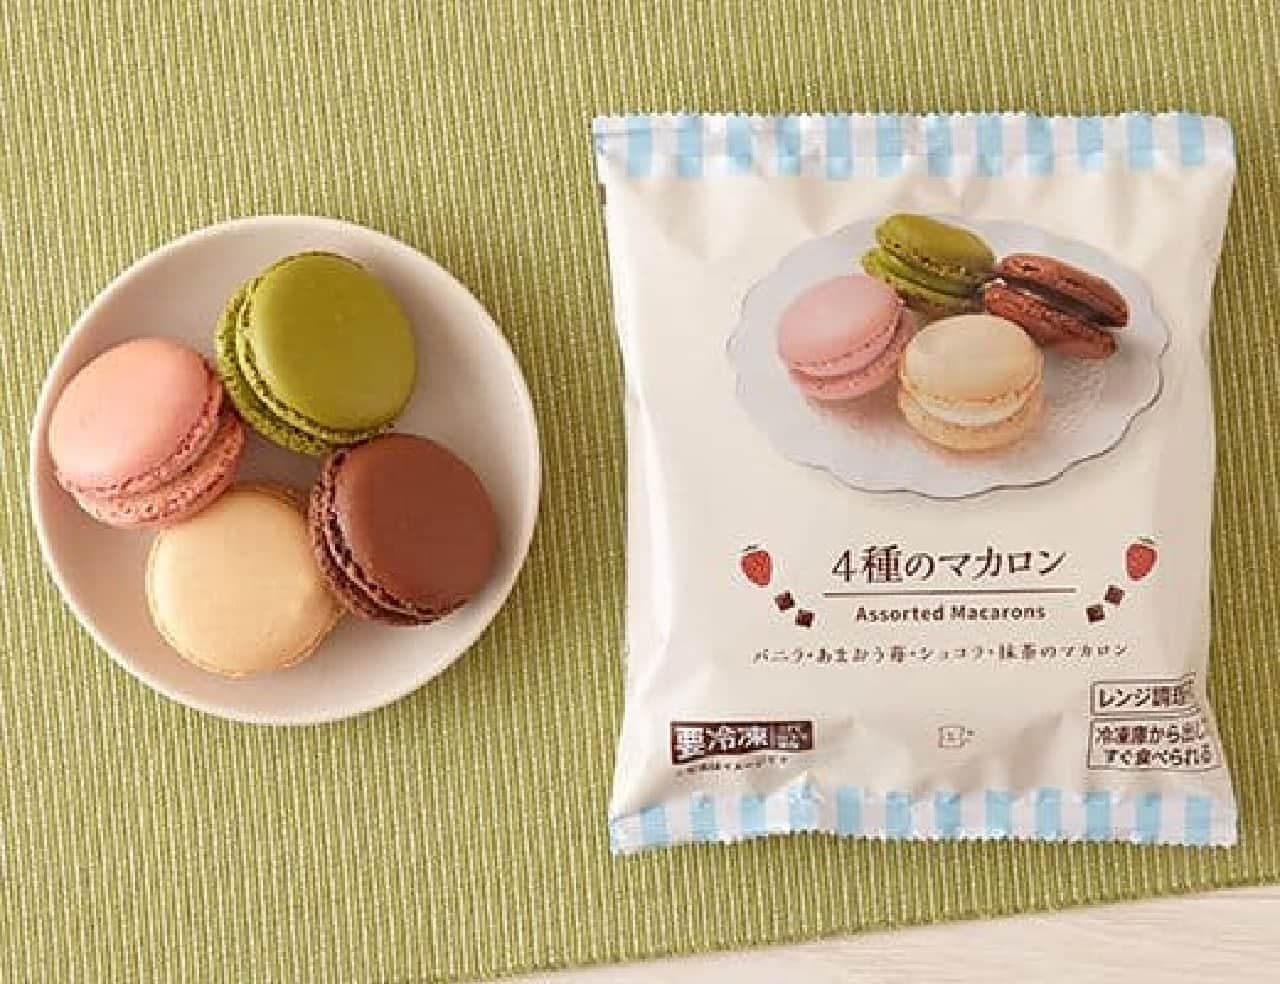 Lawson "4 kinds of macaroons"